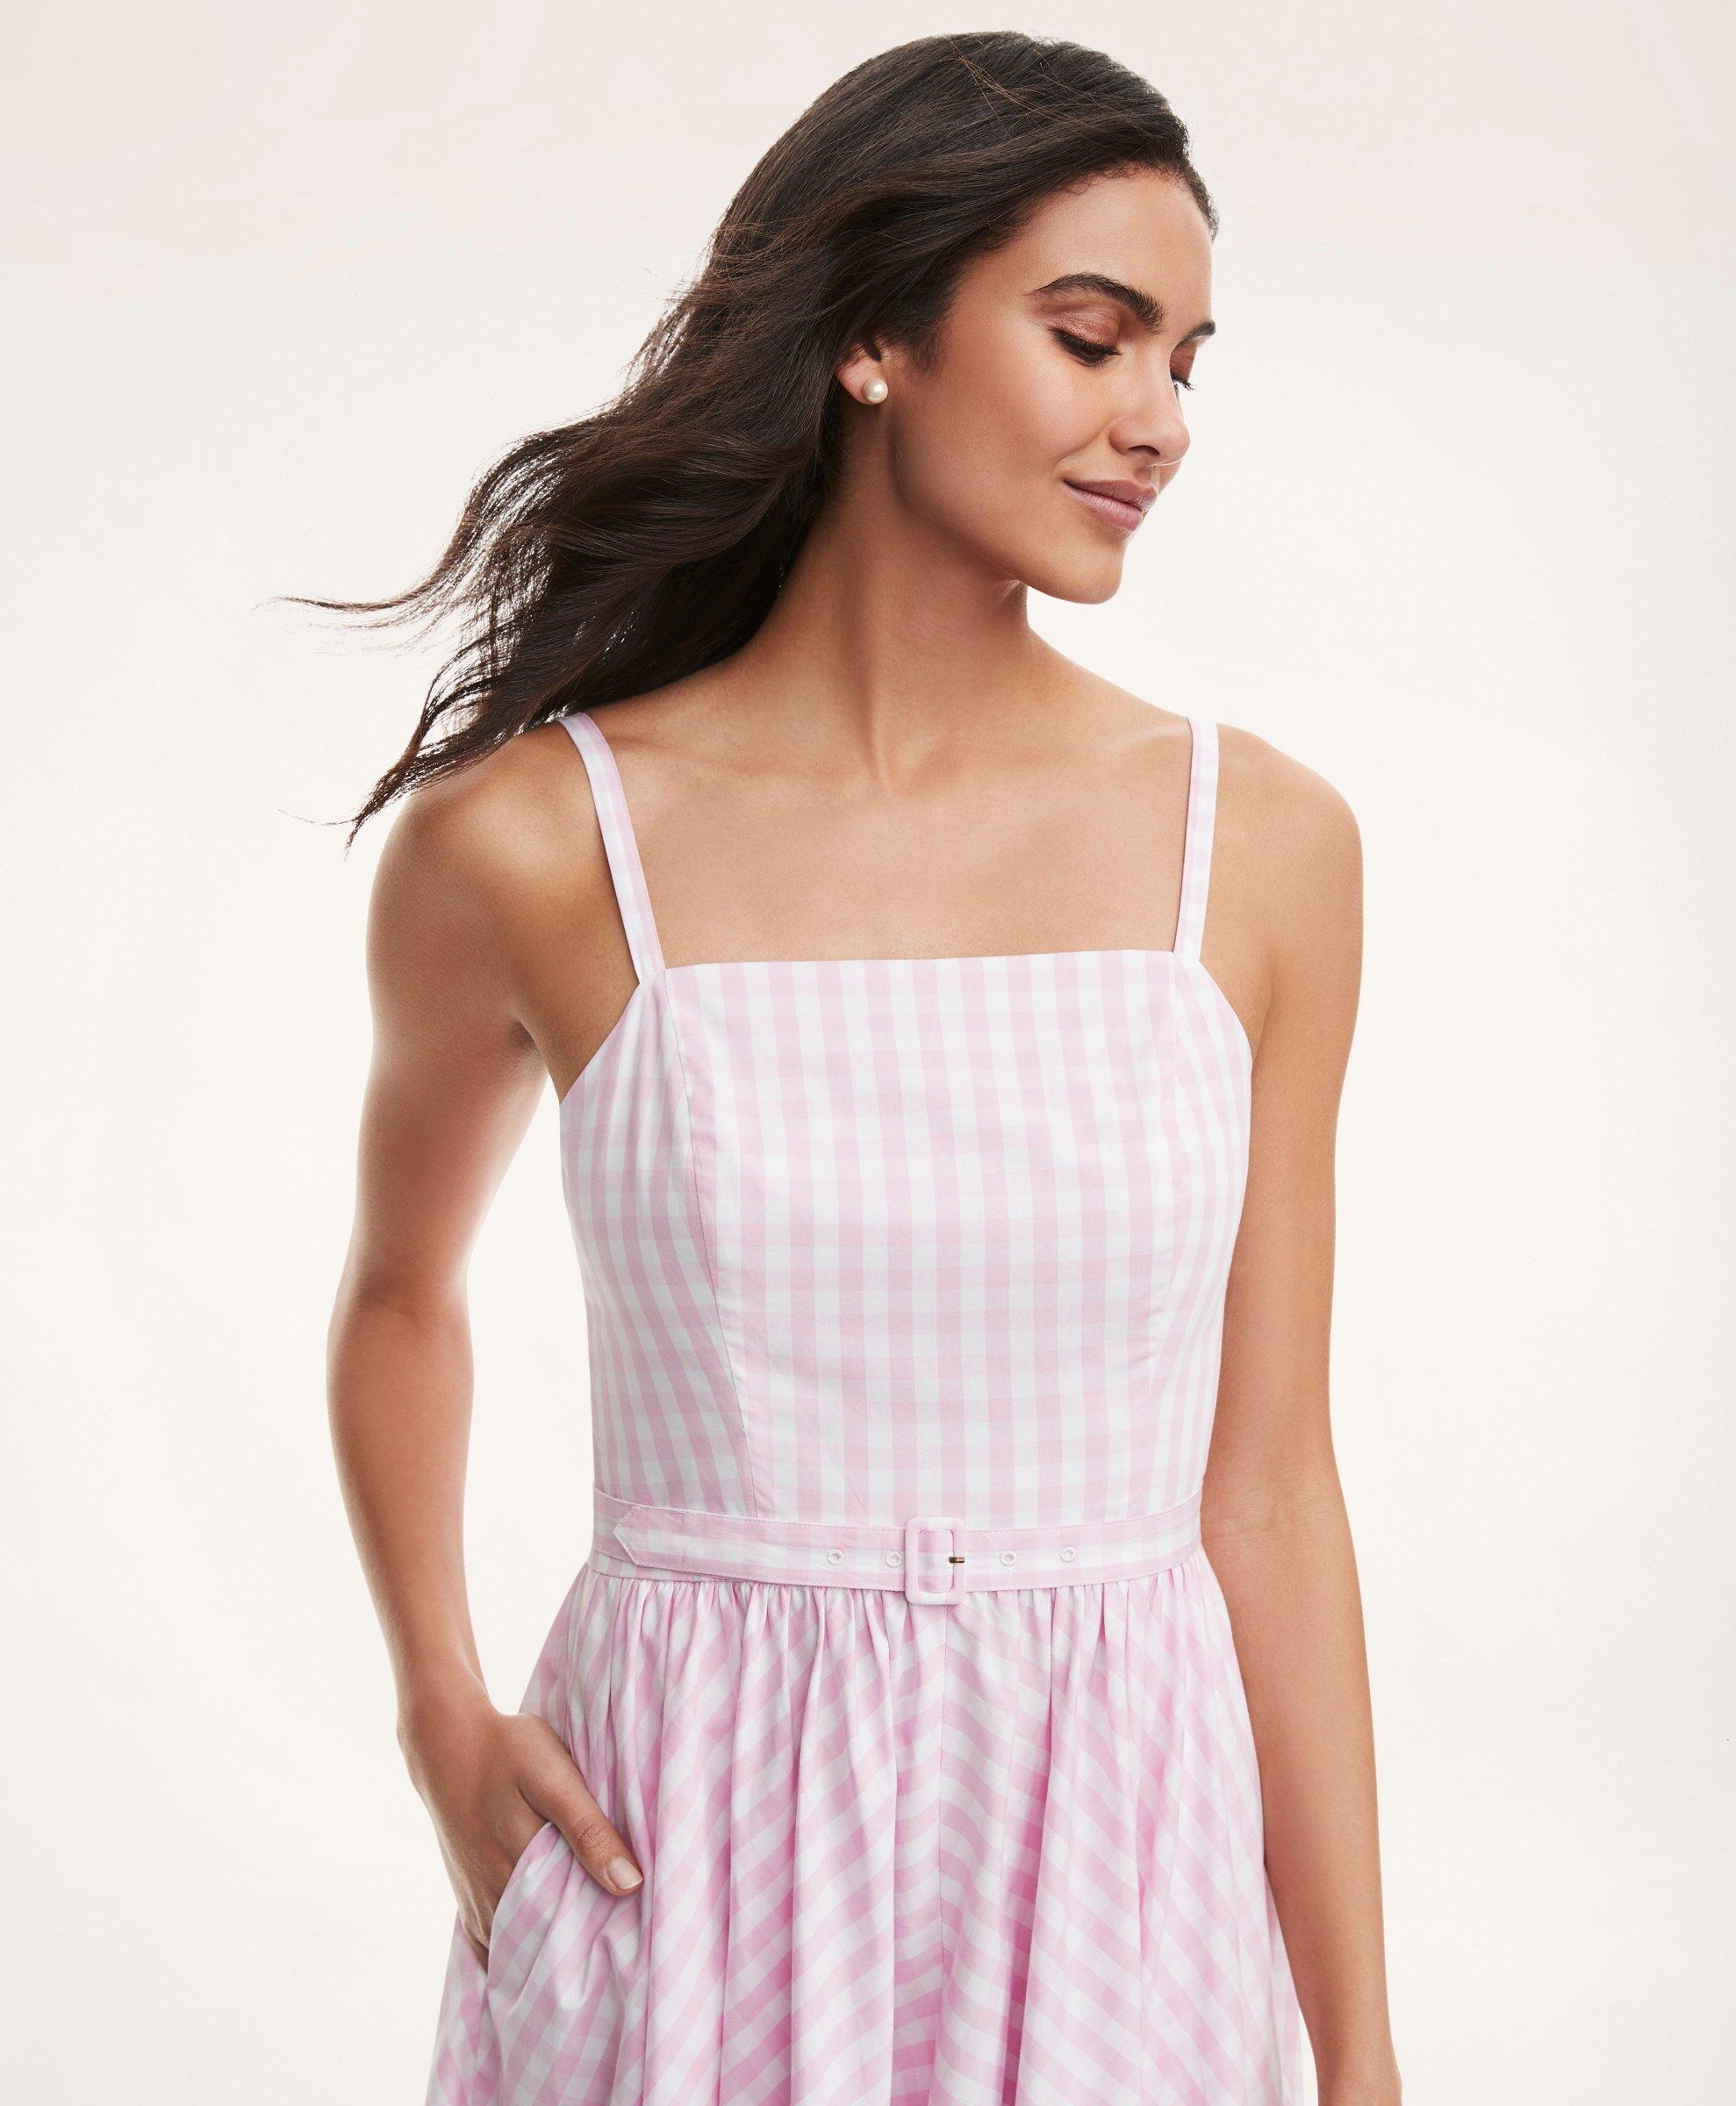 https://cdn.media.amplience.net/i/brooksbrothers/WX00680_PINK-WHITE_2?$large$&fmt=auto